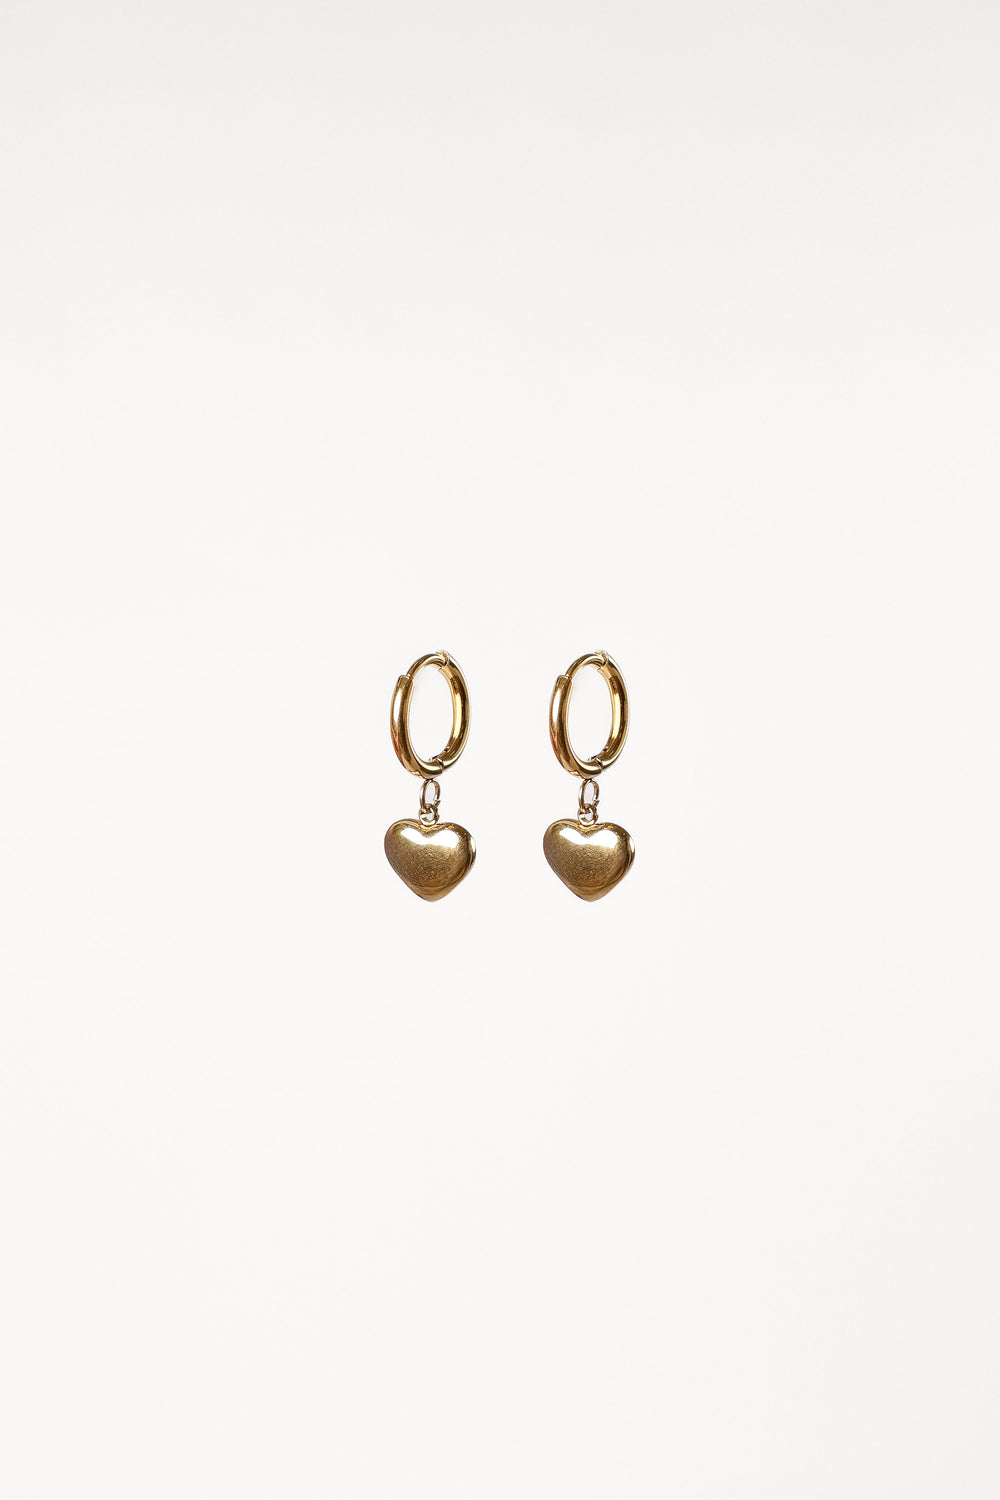 Petal and Pup USA ACCESSORIES Joree Heart Hoop Earrings - Gold One Size